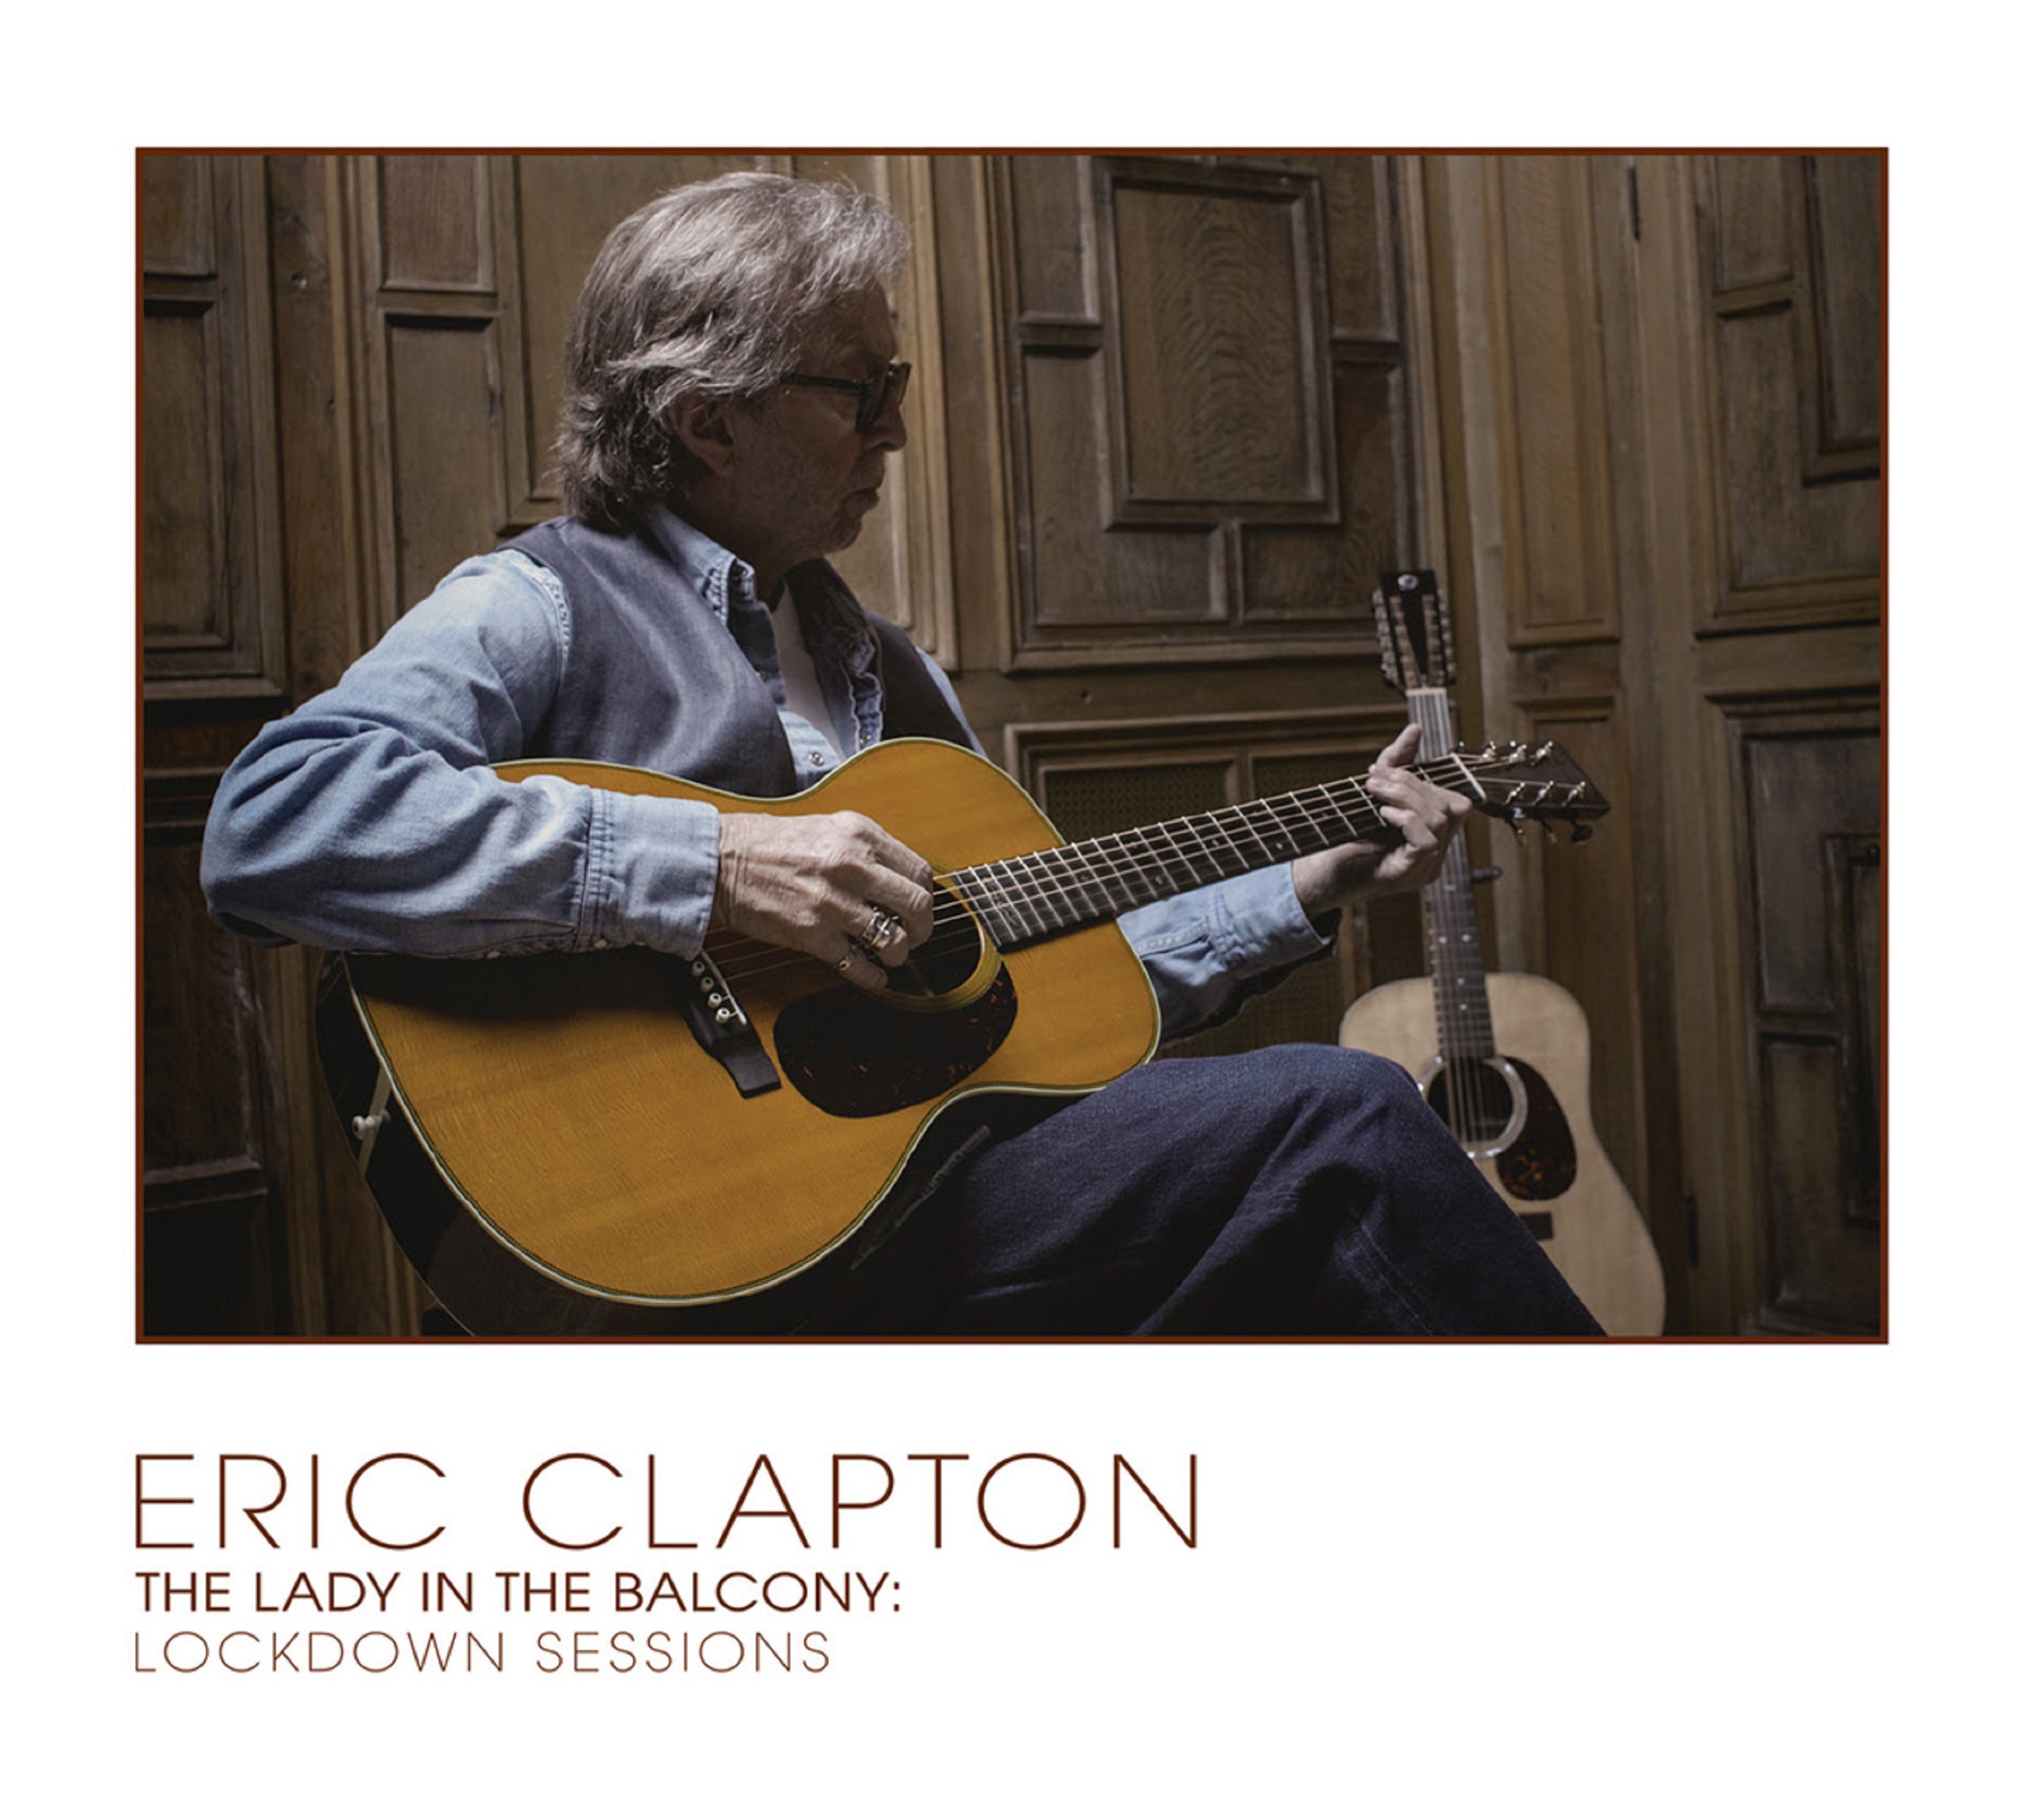 Eric Clapton “The Lady in the Balcony: Lockdown Sessions”